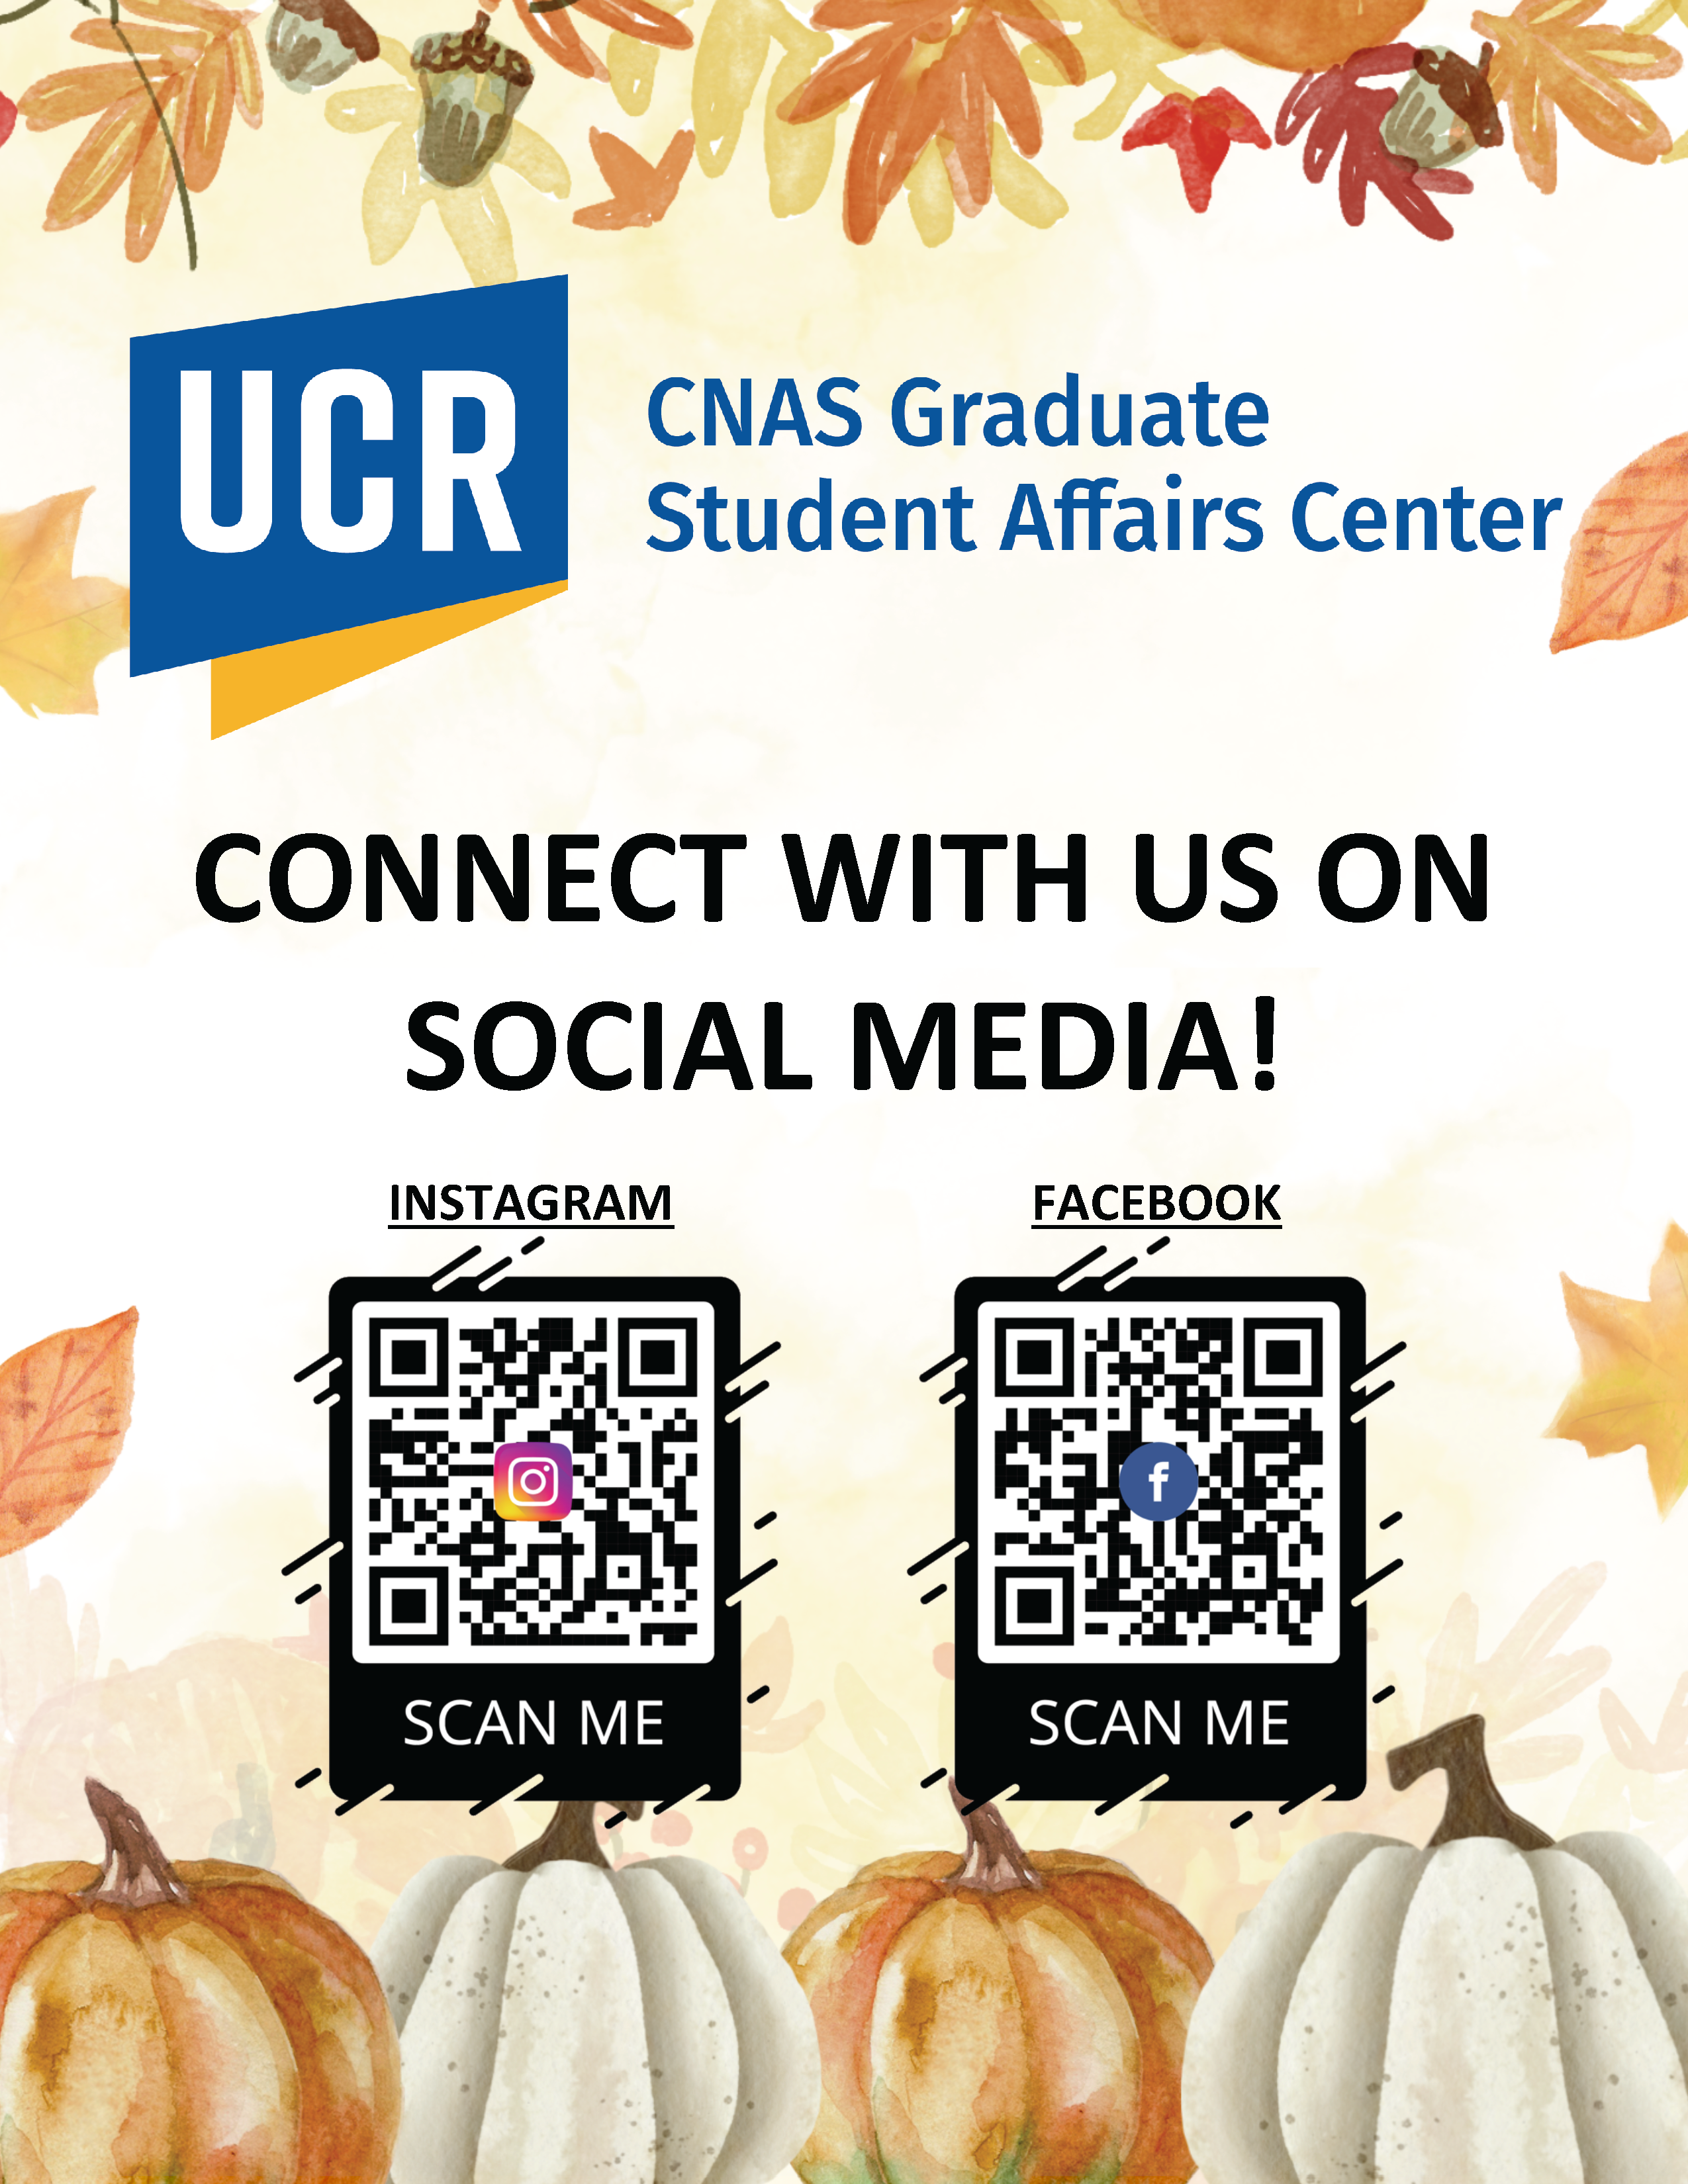 CNAS GSAC Connect with Us on Social Media Flyer